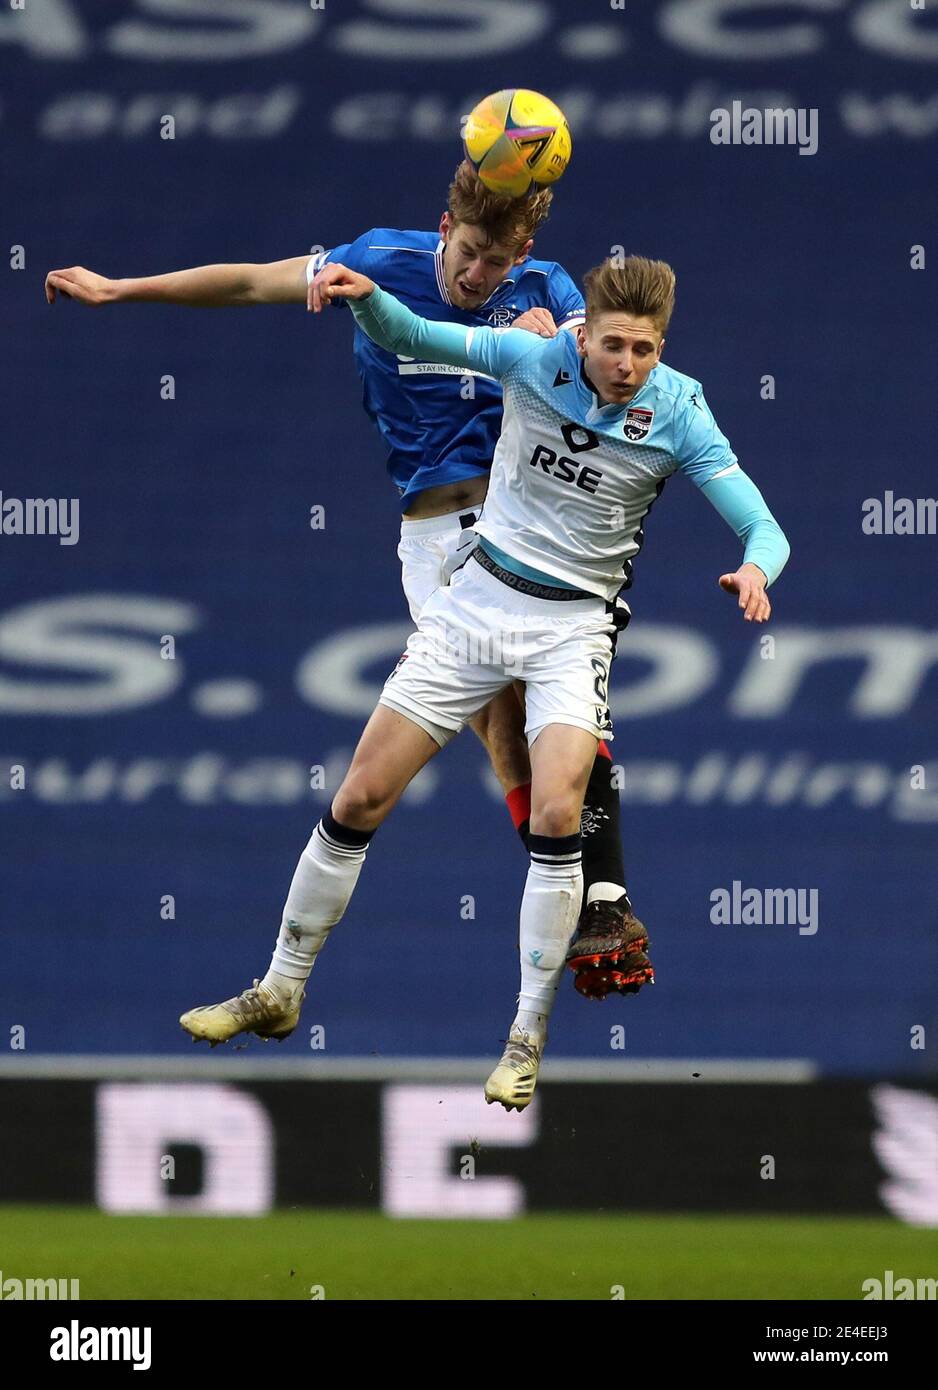 Ross County's Oliver Shaw (right) and Rangers' Filip Helander battle for the ball during the Scottish Premiership match at Ibrox Stadium, Glasgow. Picture date: Saturday January 23, 2021. Stock Photo